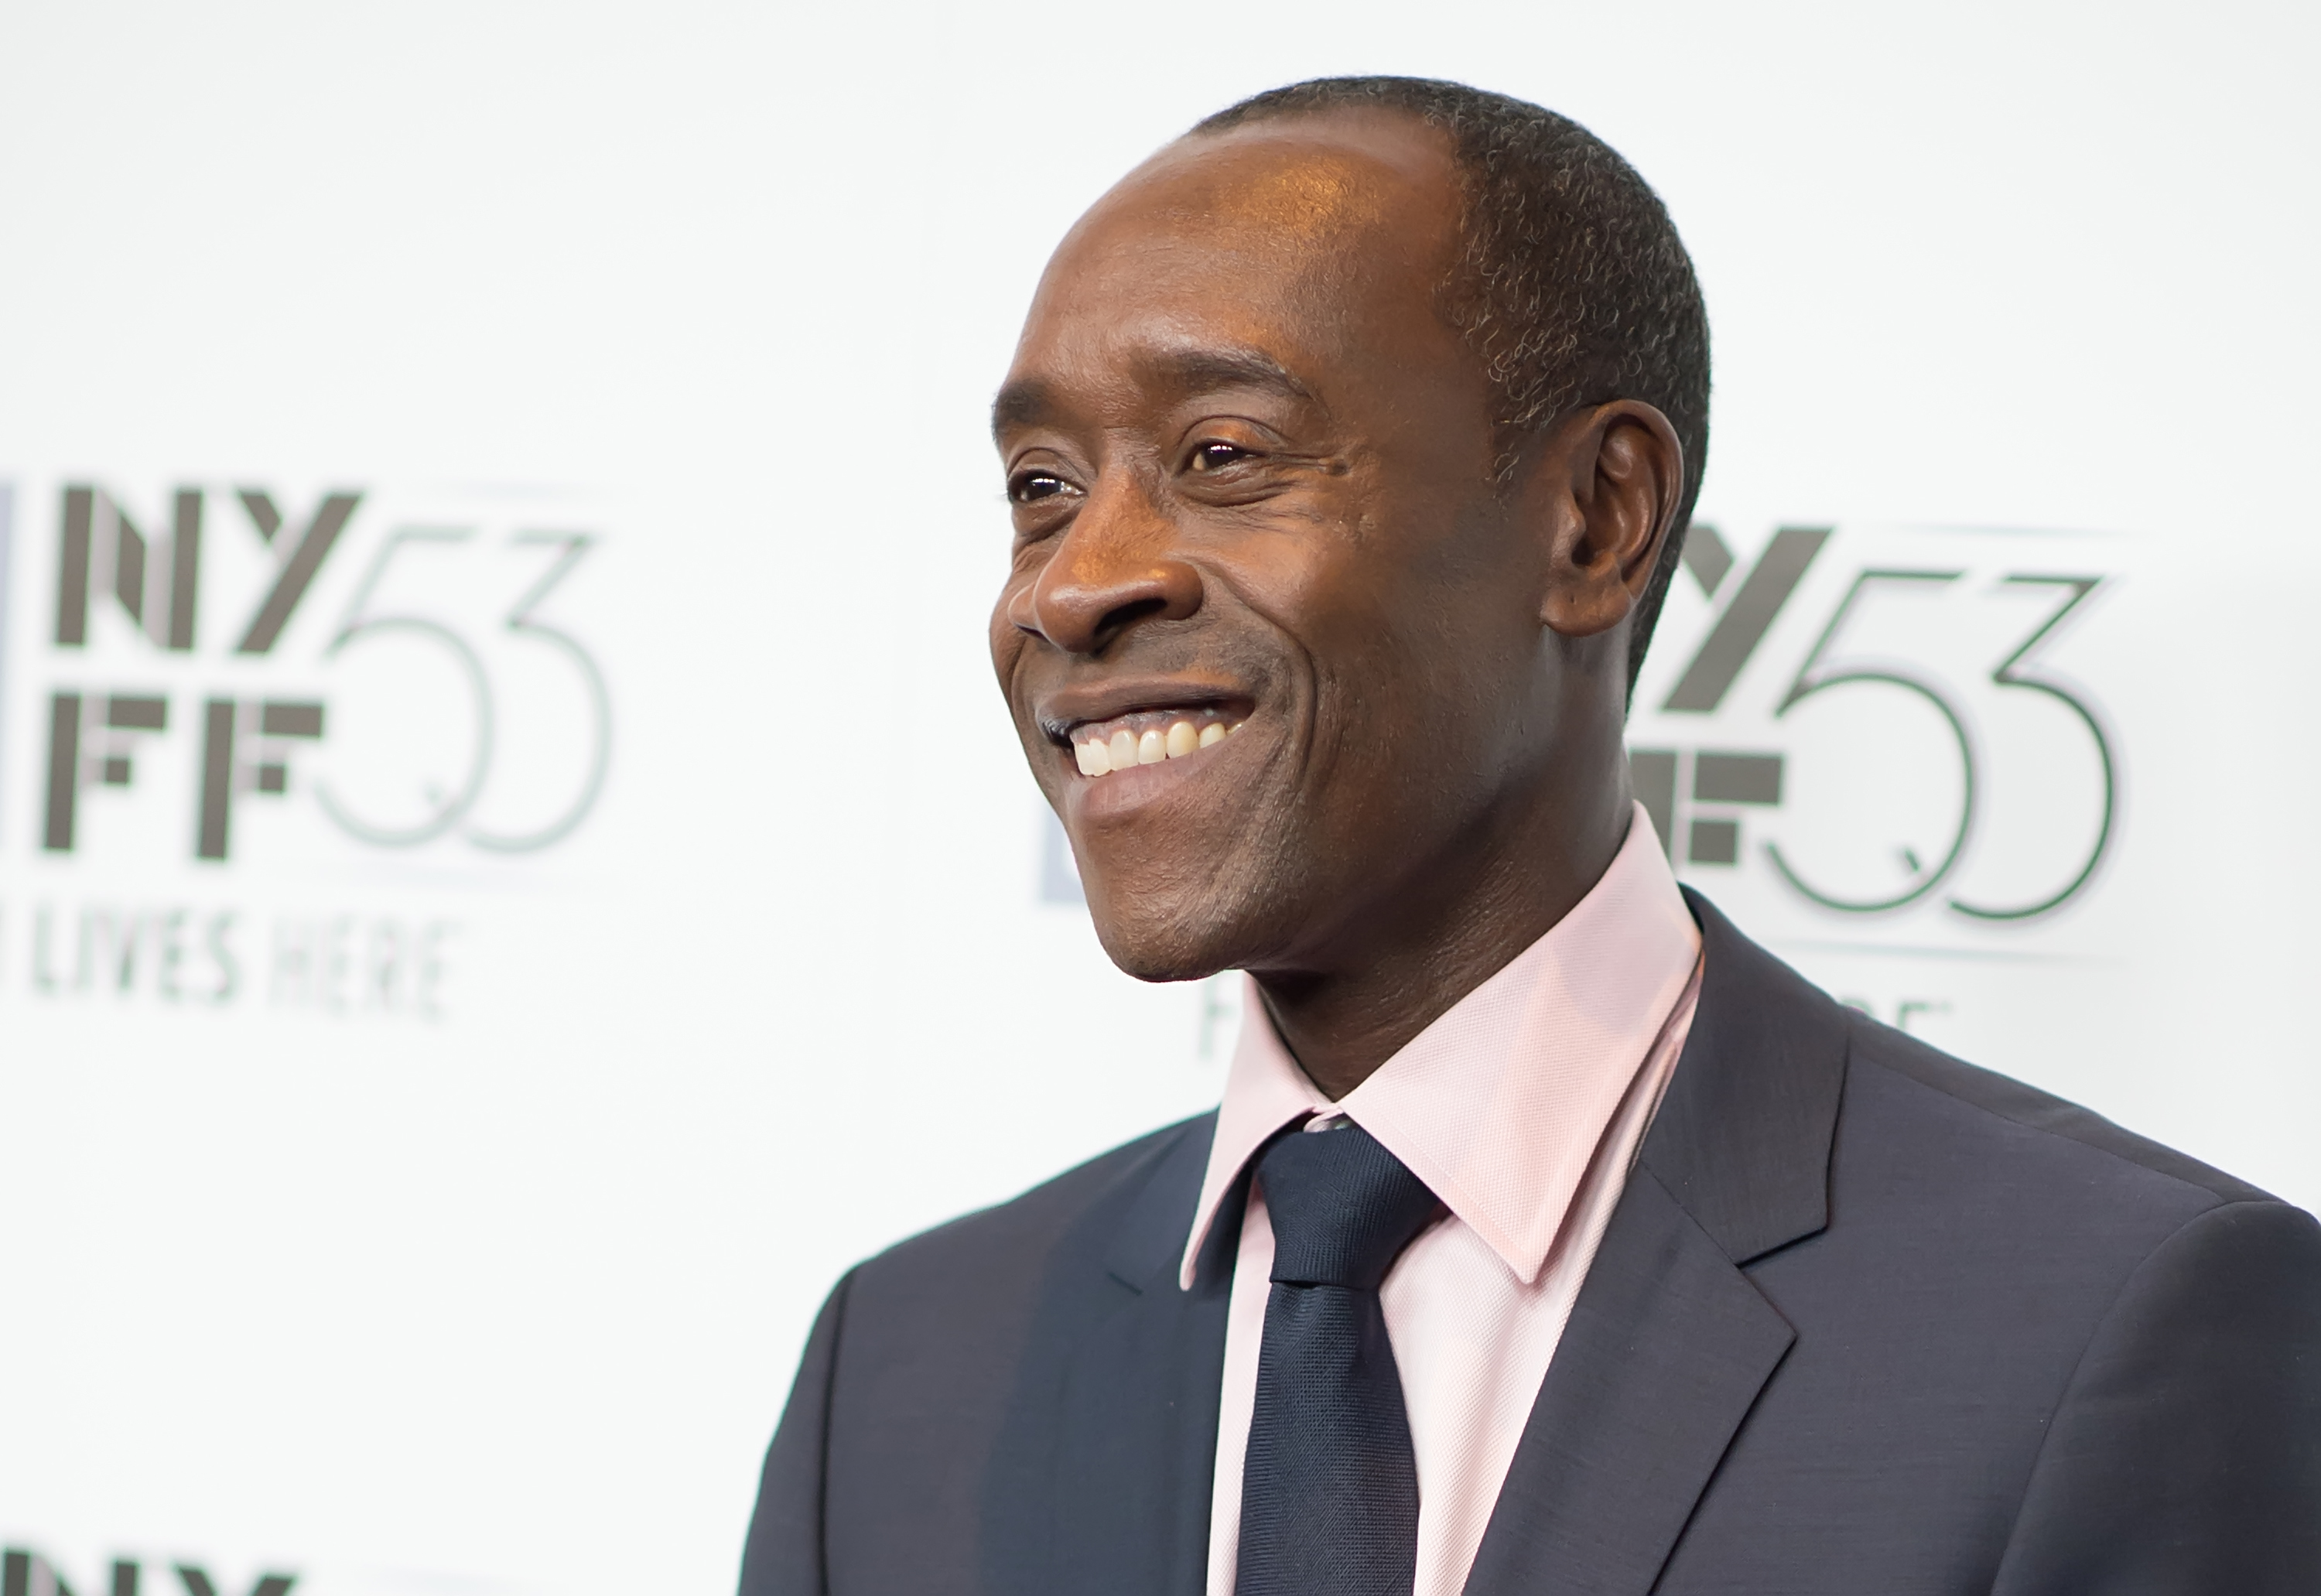 Actor Don Cheadle attends 53rd New York Film Festival - Closing Night Gala in New York City on Oct. 10, 2015. (Gilbert Carrasquillo—FilmMagic)